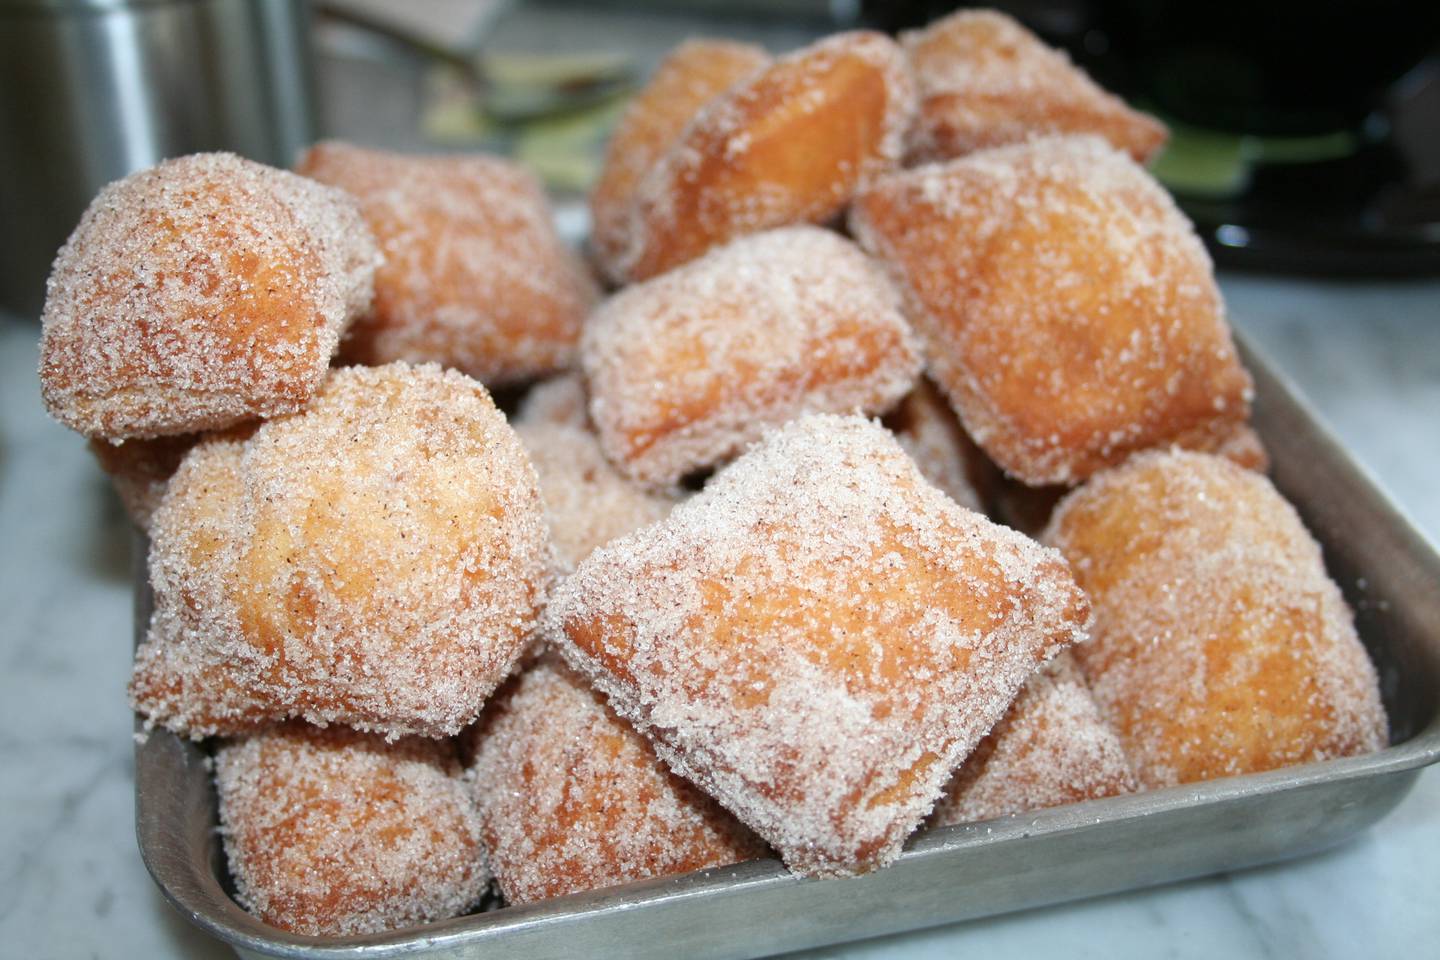 Beignet Fest returning to City Park this fall